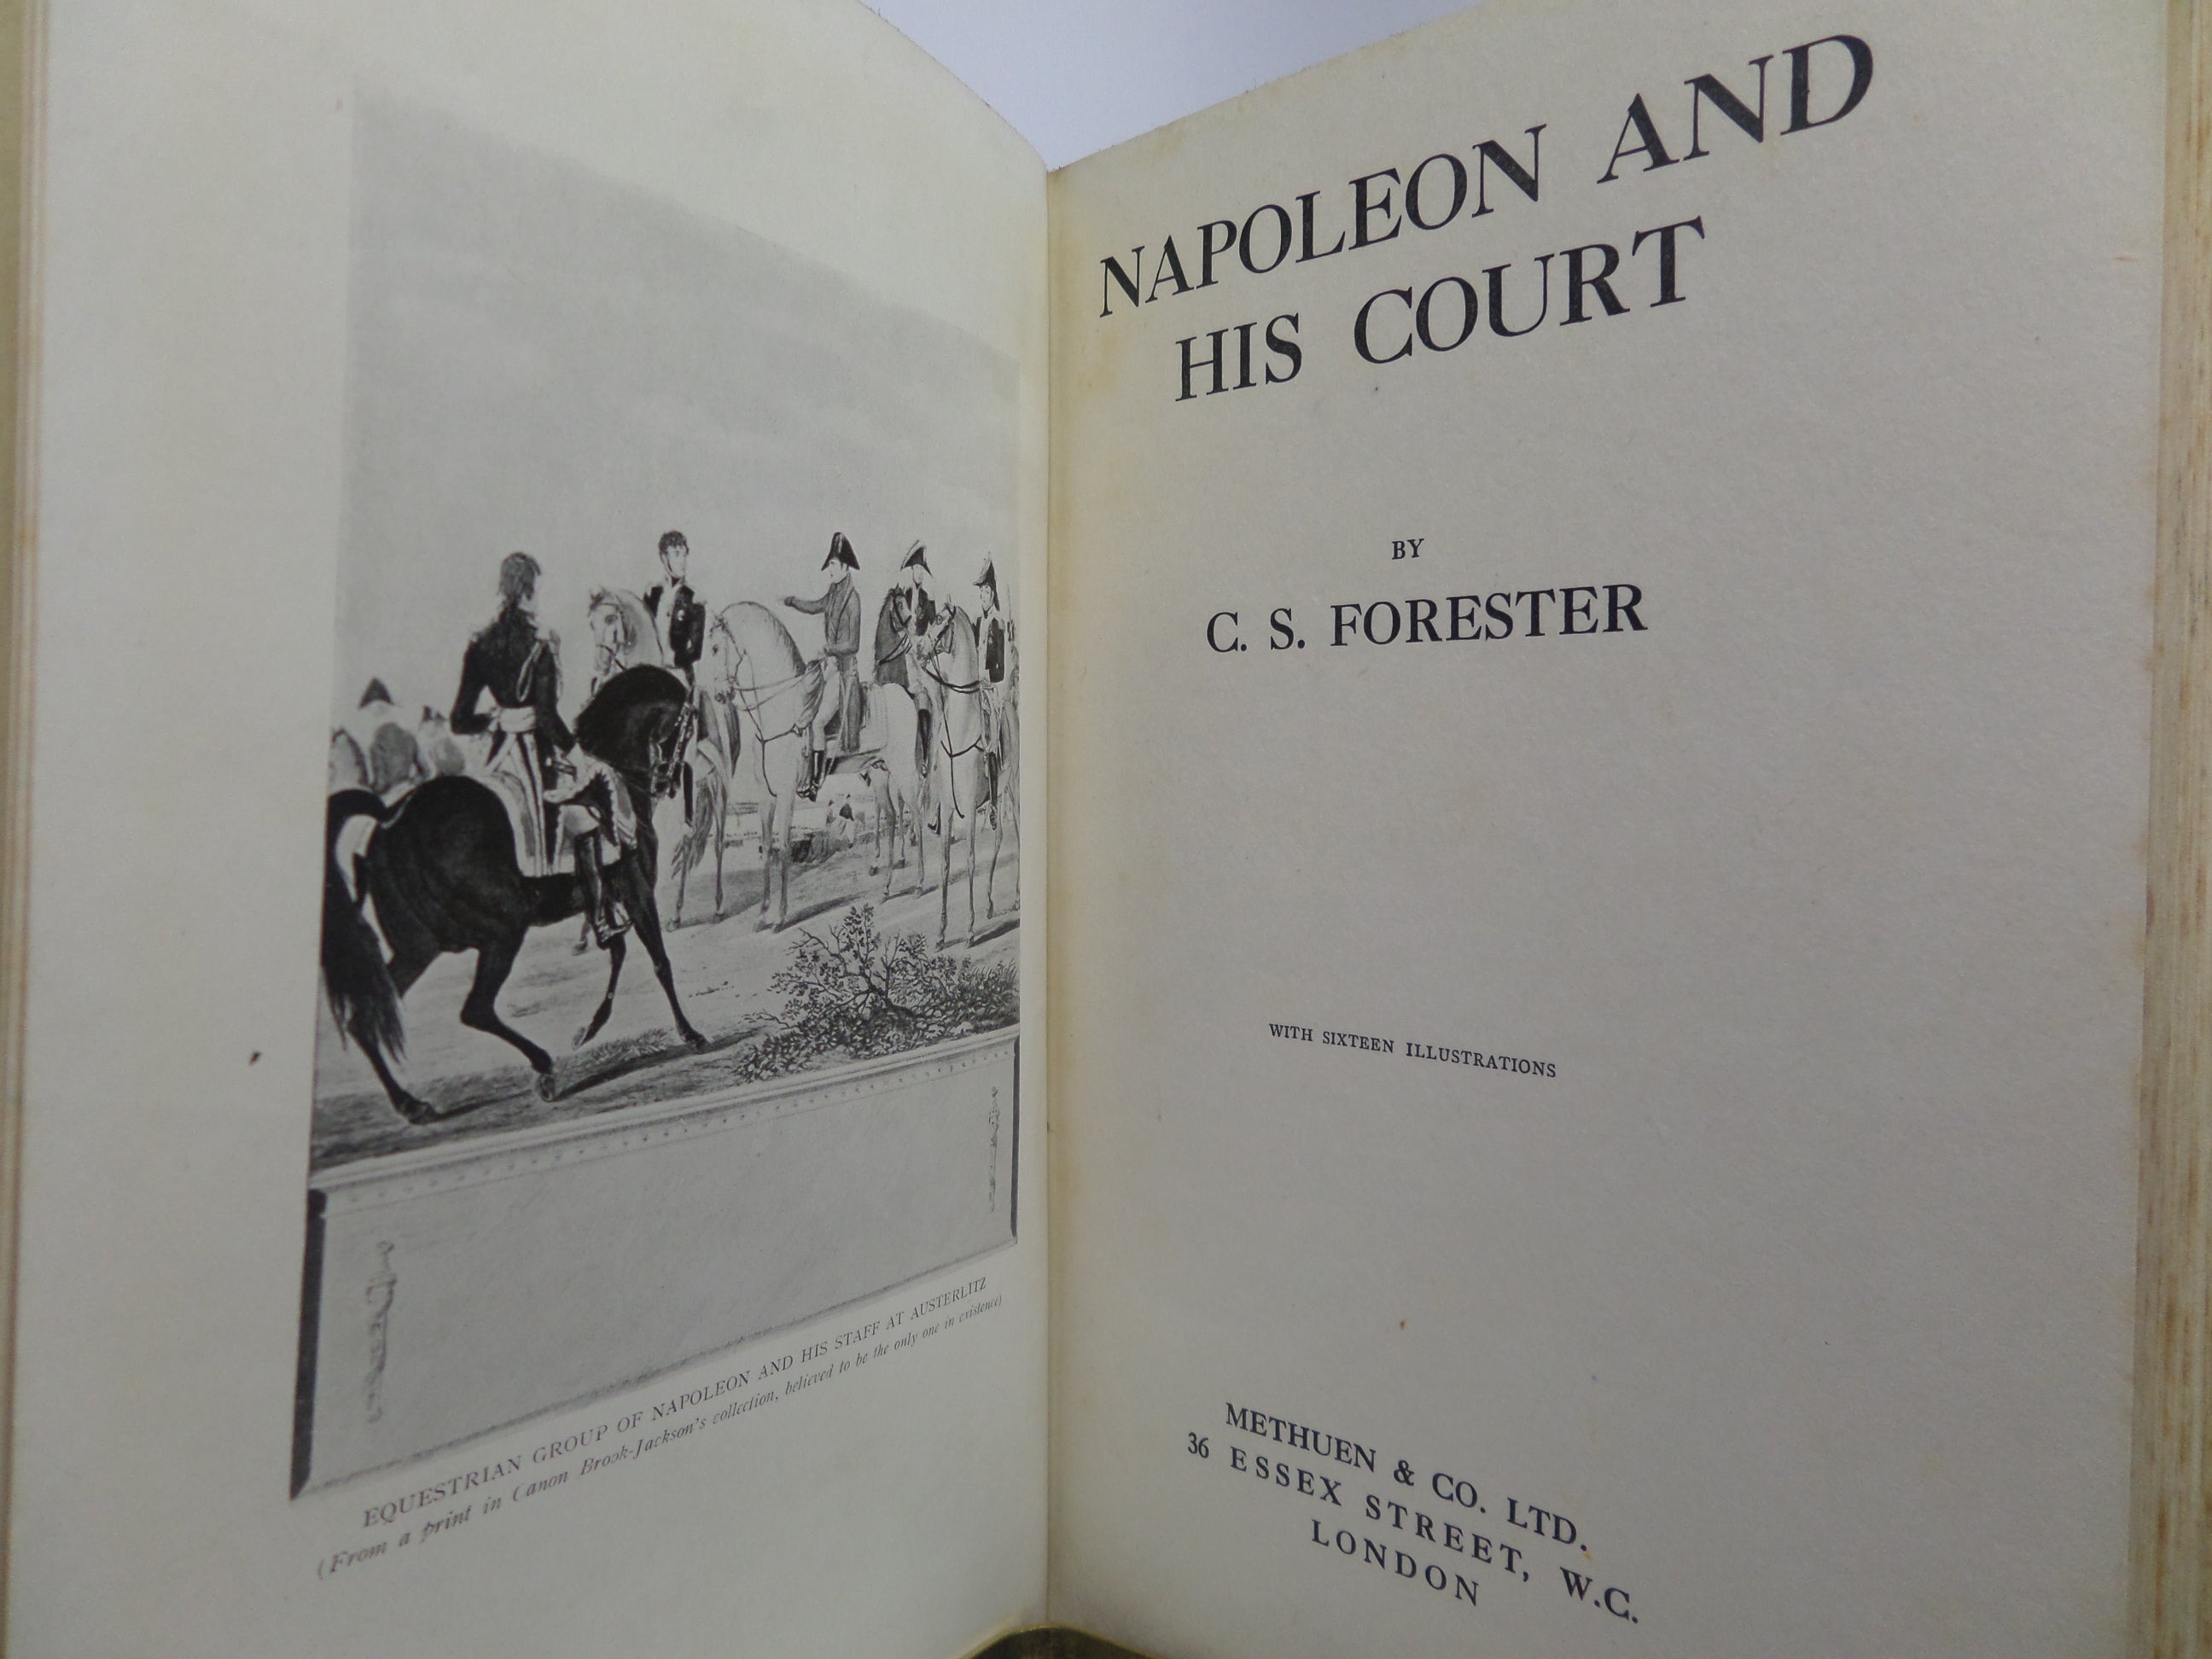 NAPOLEON AND HIS COURT BY C.S. FORESTER 1924 FIRST EDITION, HARDBACK WITH DUST JACKET